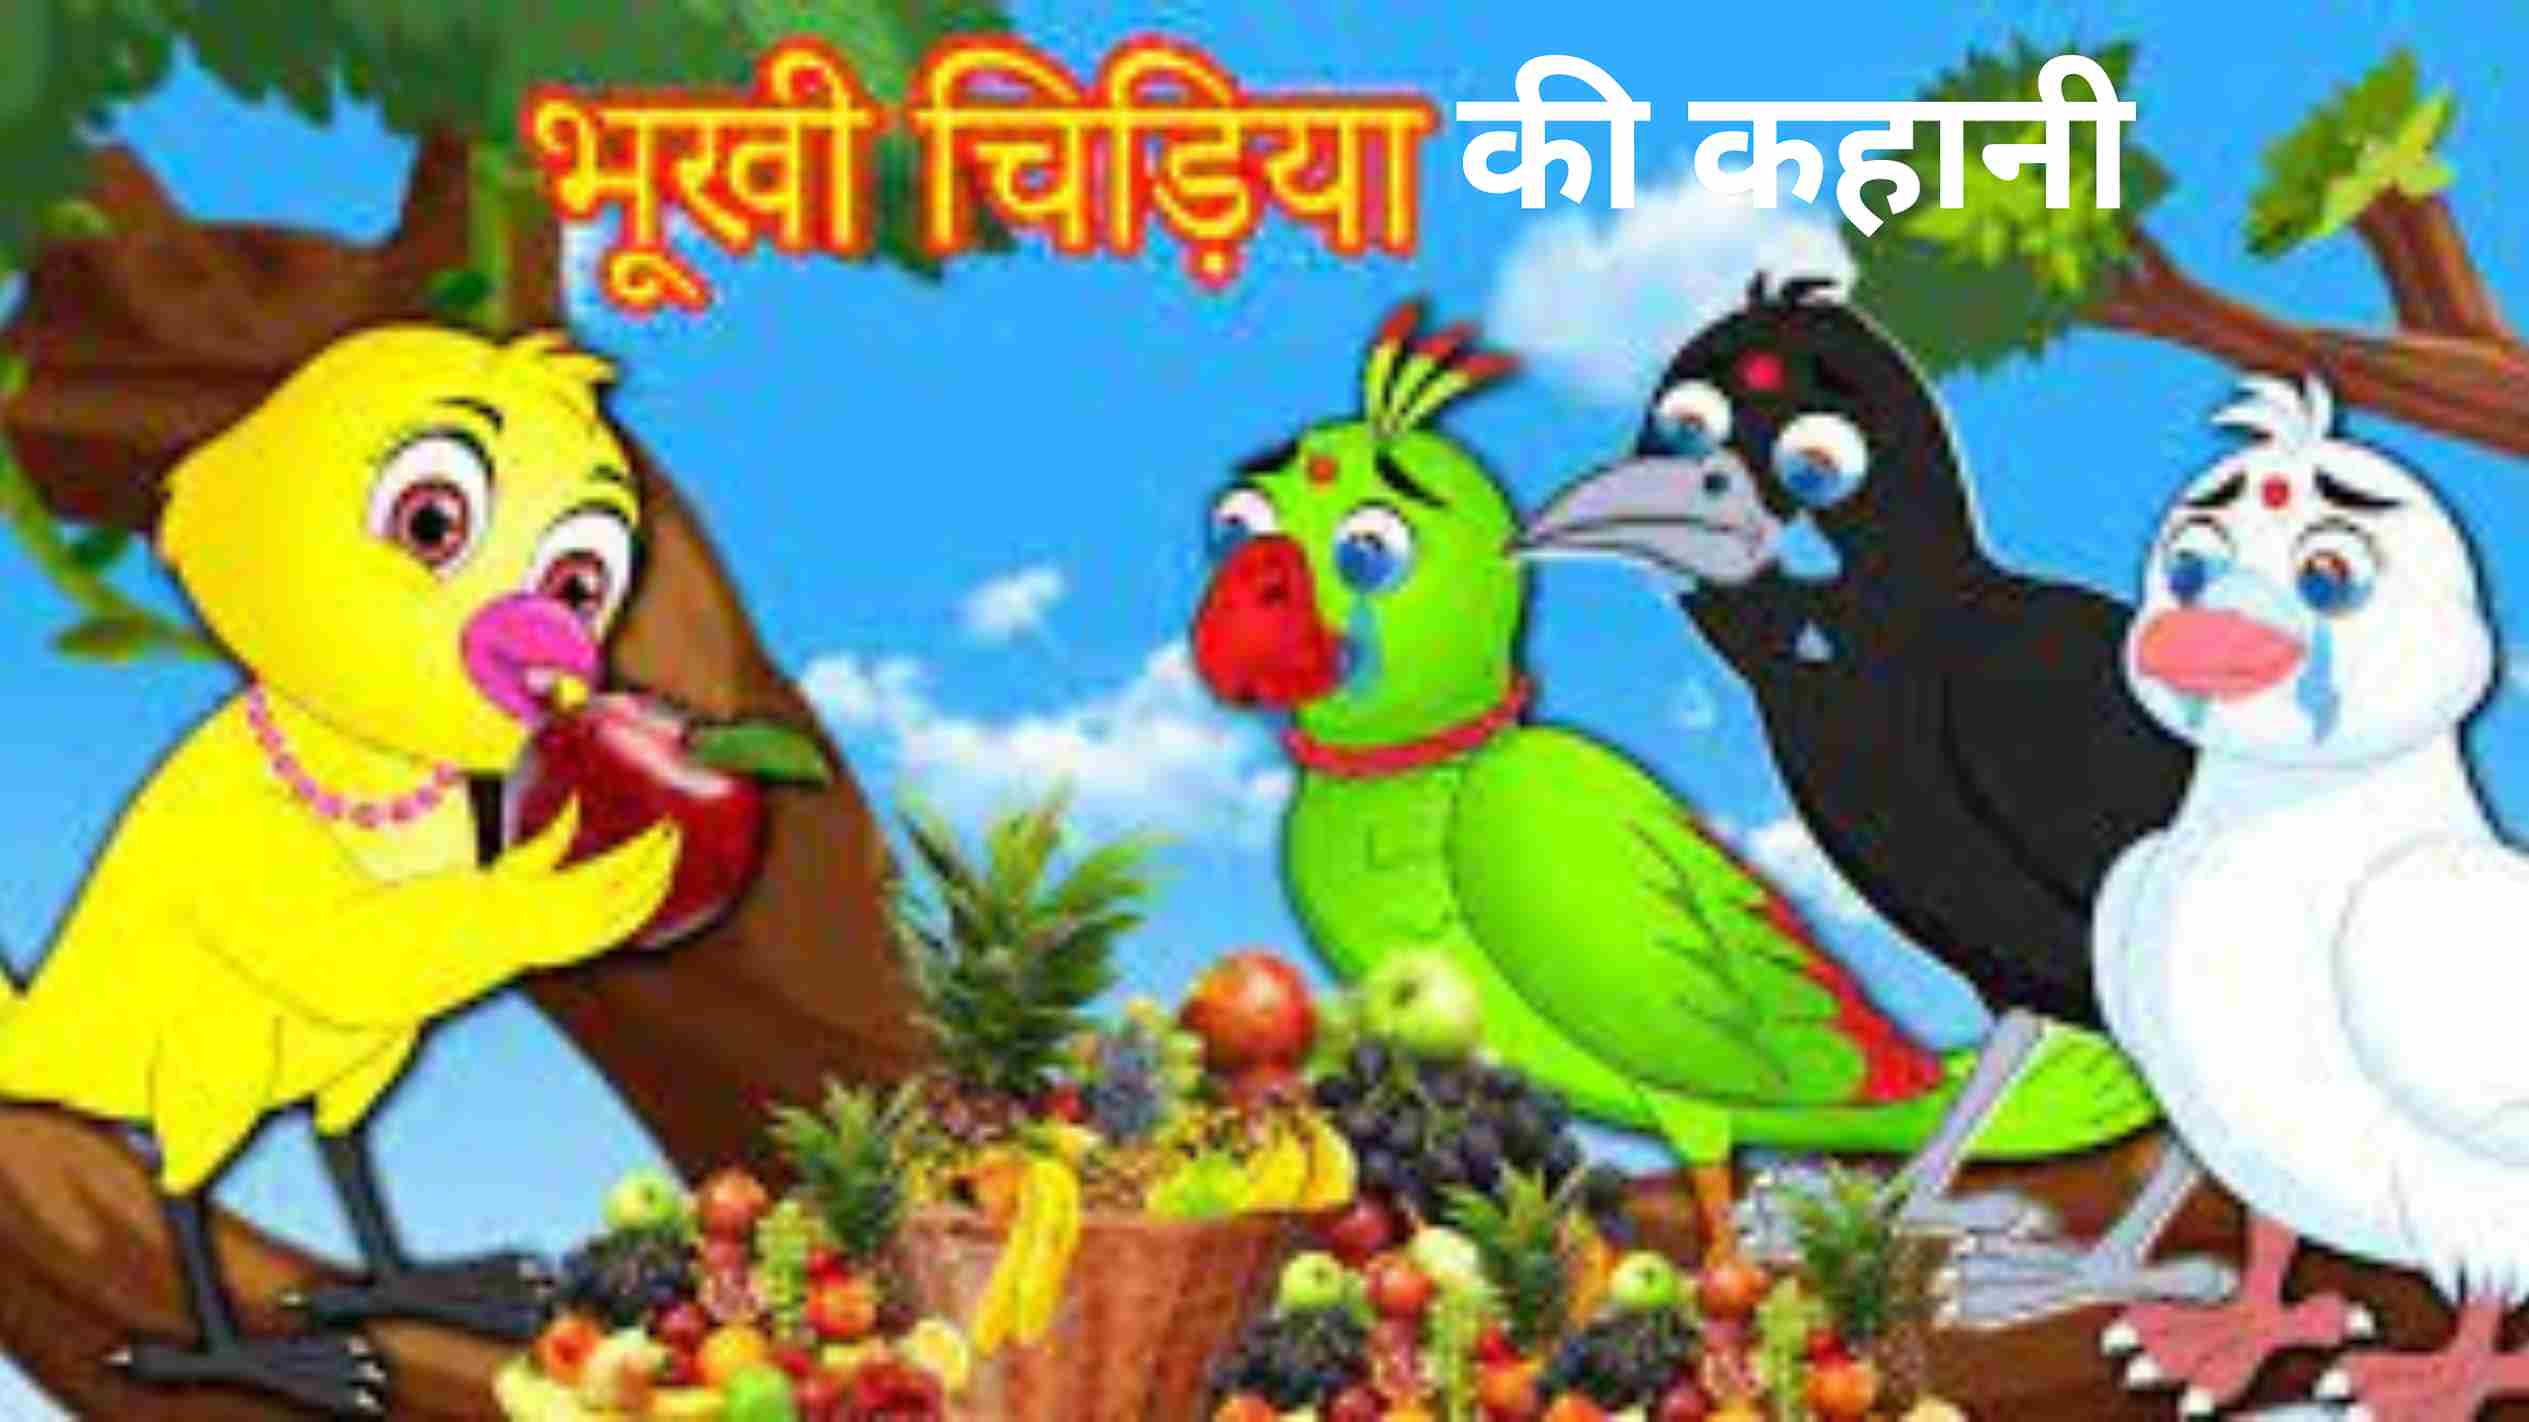 Hungry Bird Story in Hindi With Moral